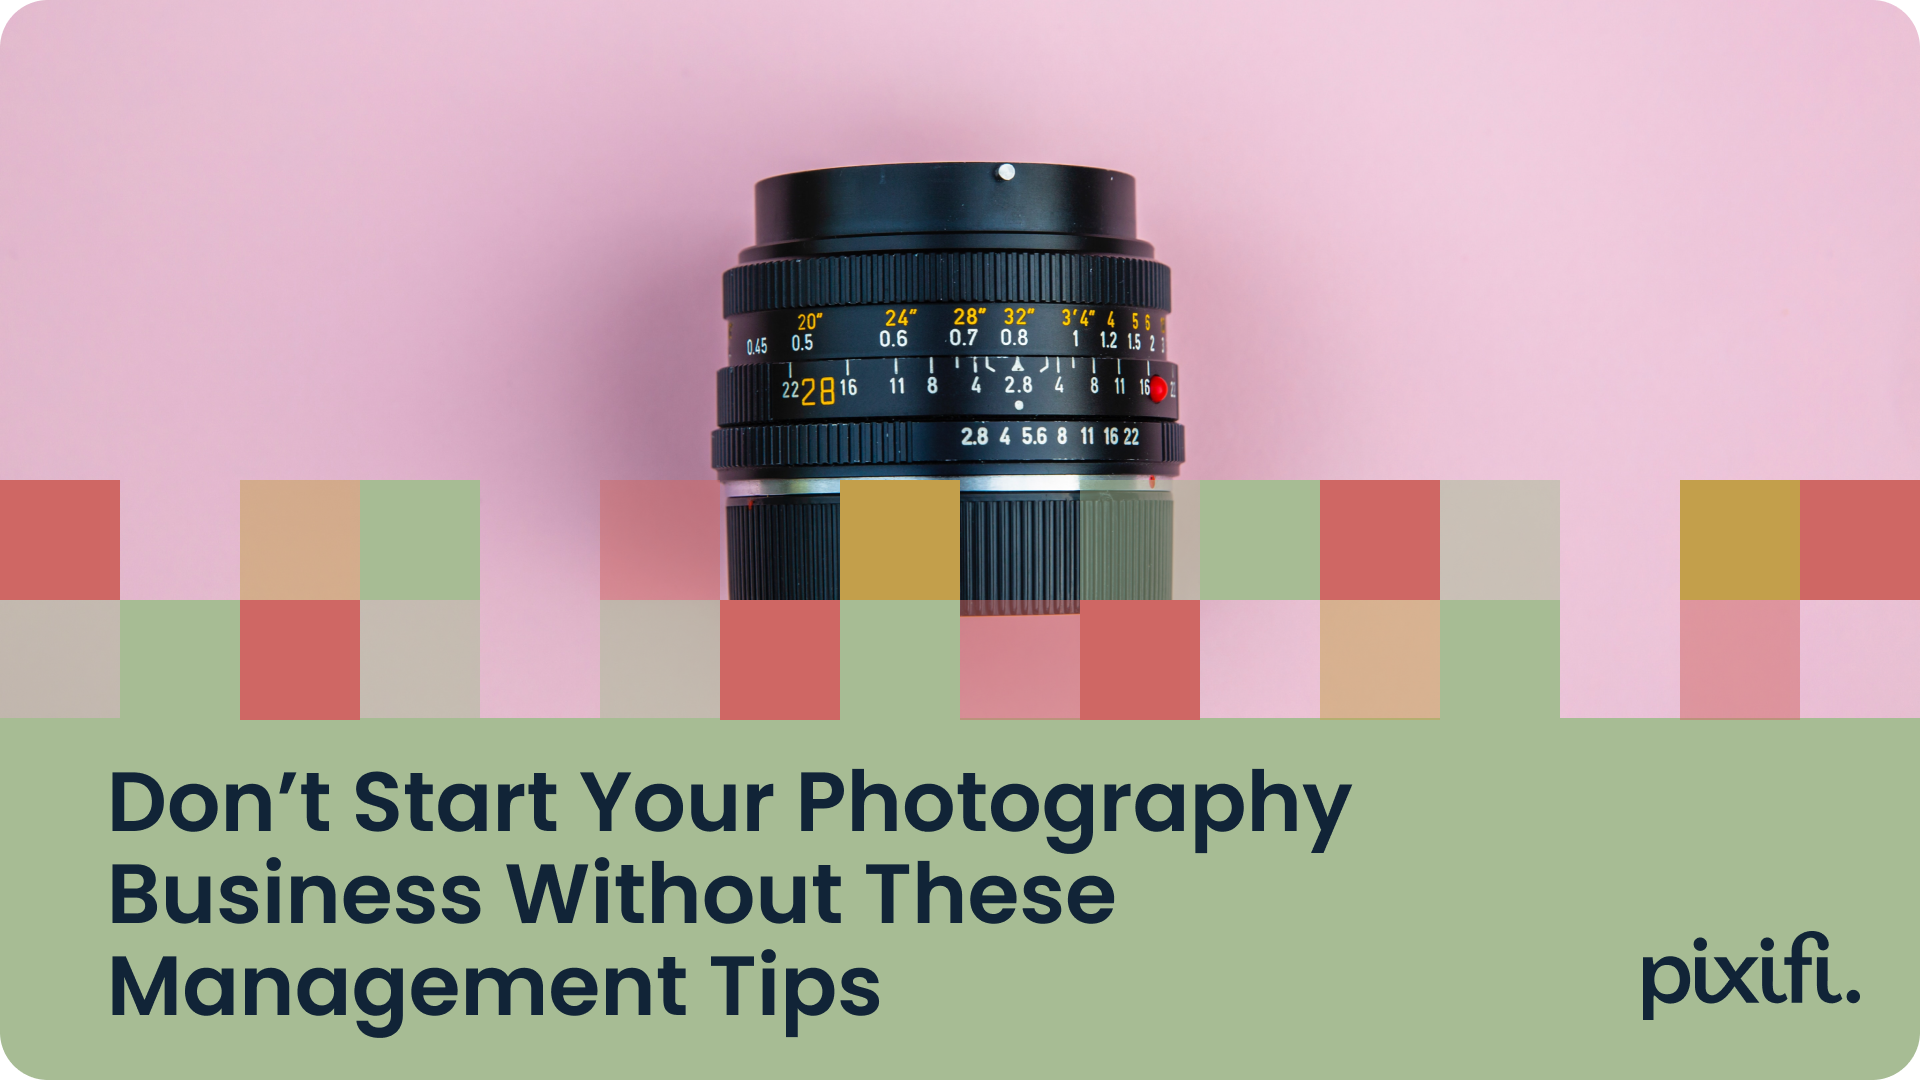 Don’t Start Your Photography Business Without These Management Tips